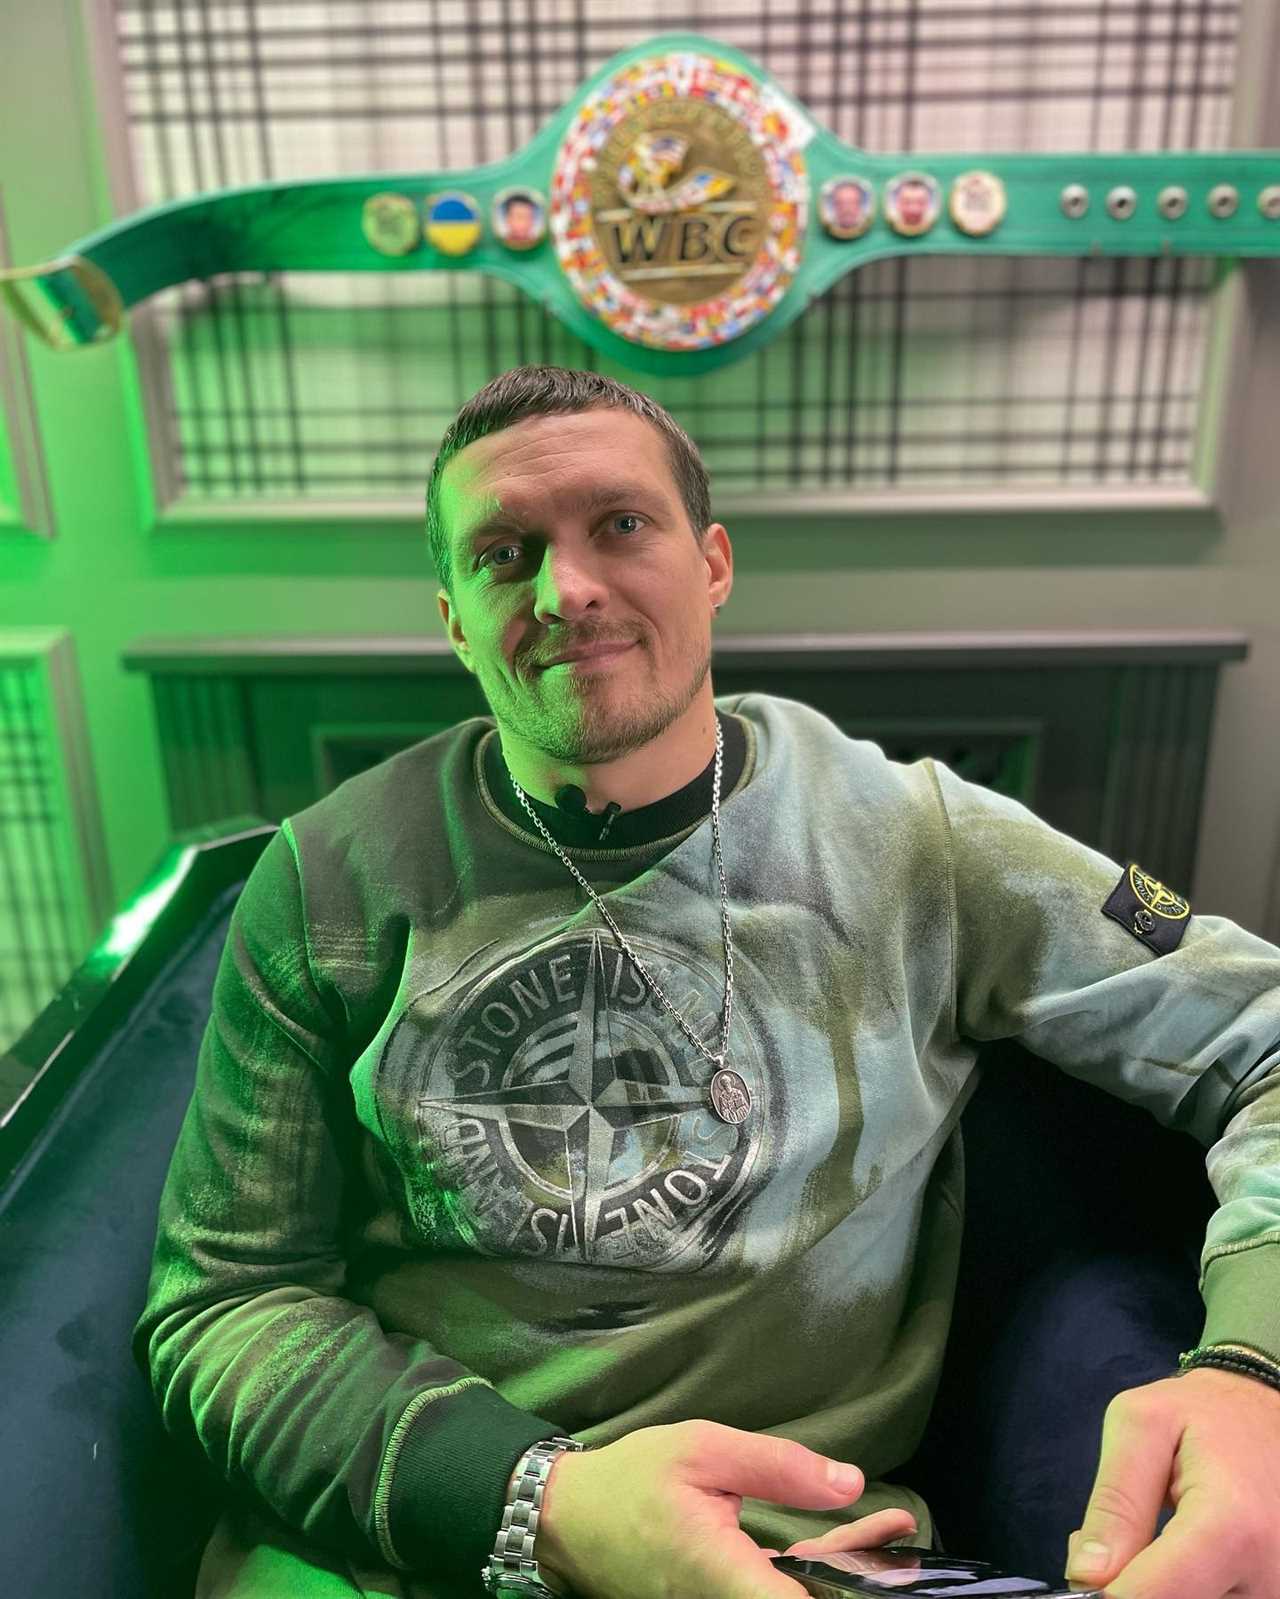 Oleksandr Usyk explains why he stopped Tyson Fury negotiations. Also, he explains what the purse split was REALLY like after talks collapsed.